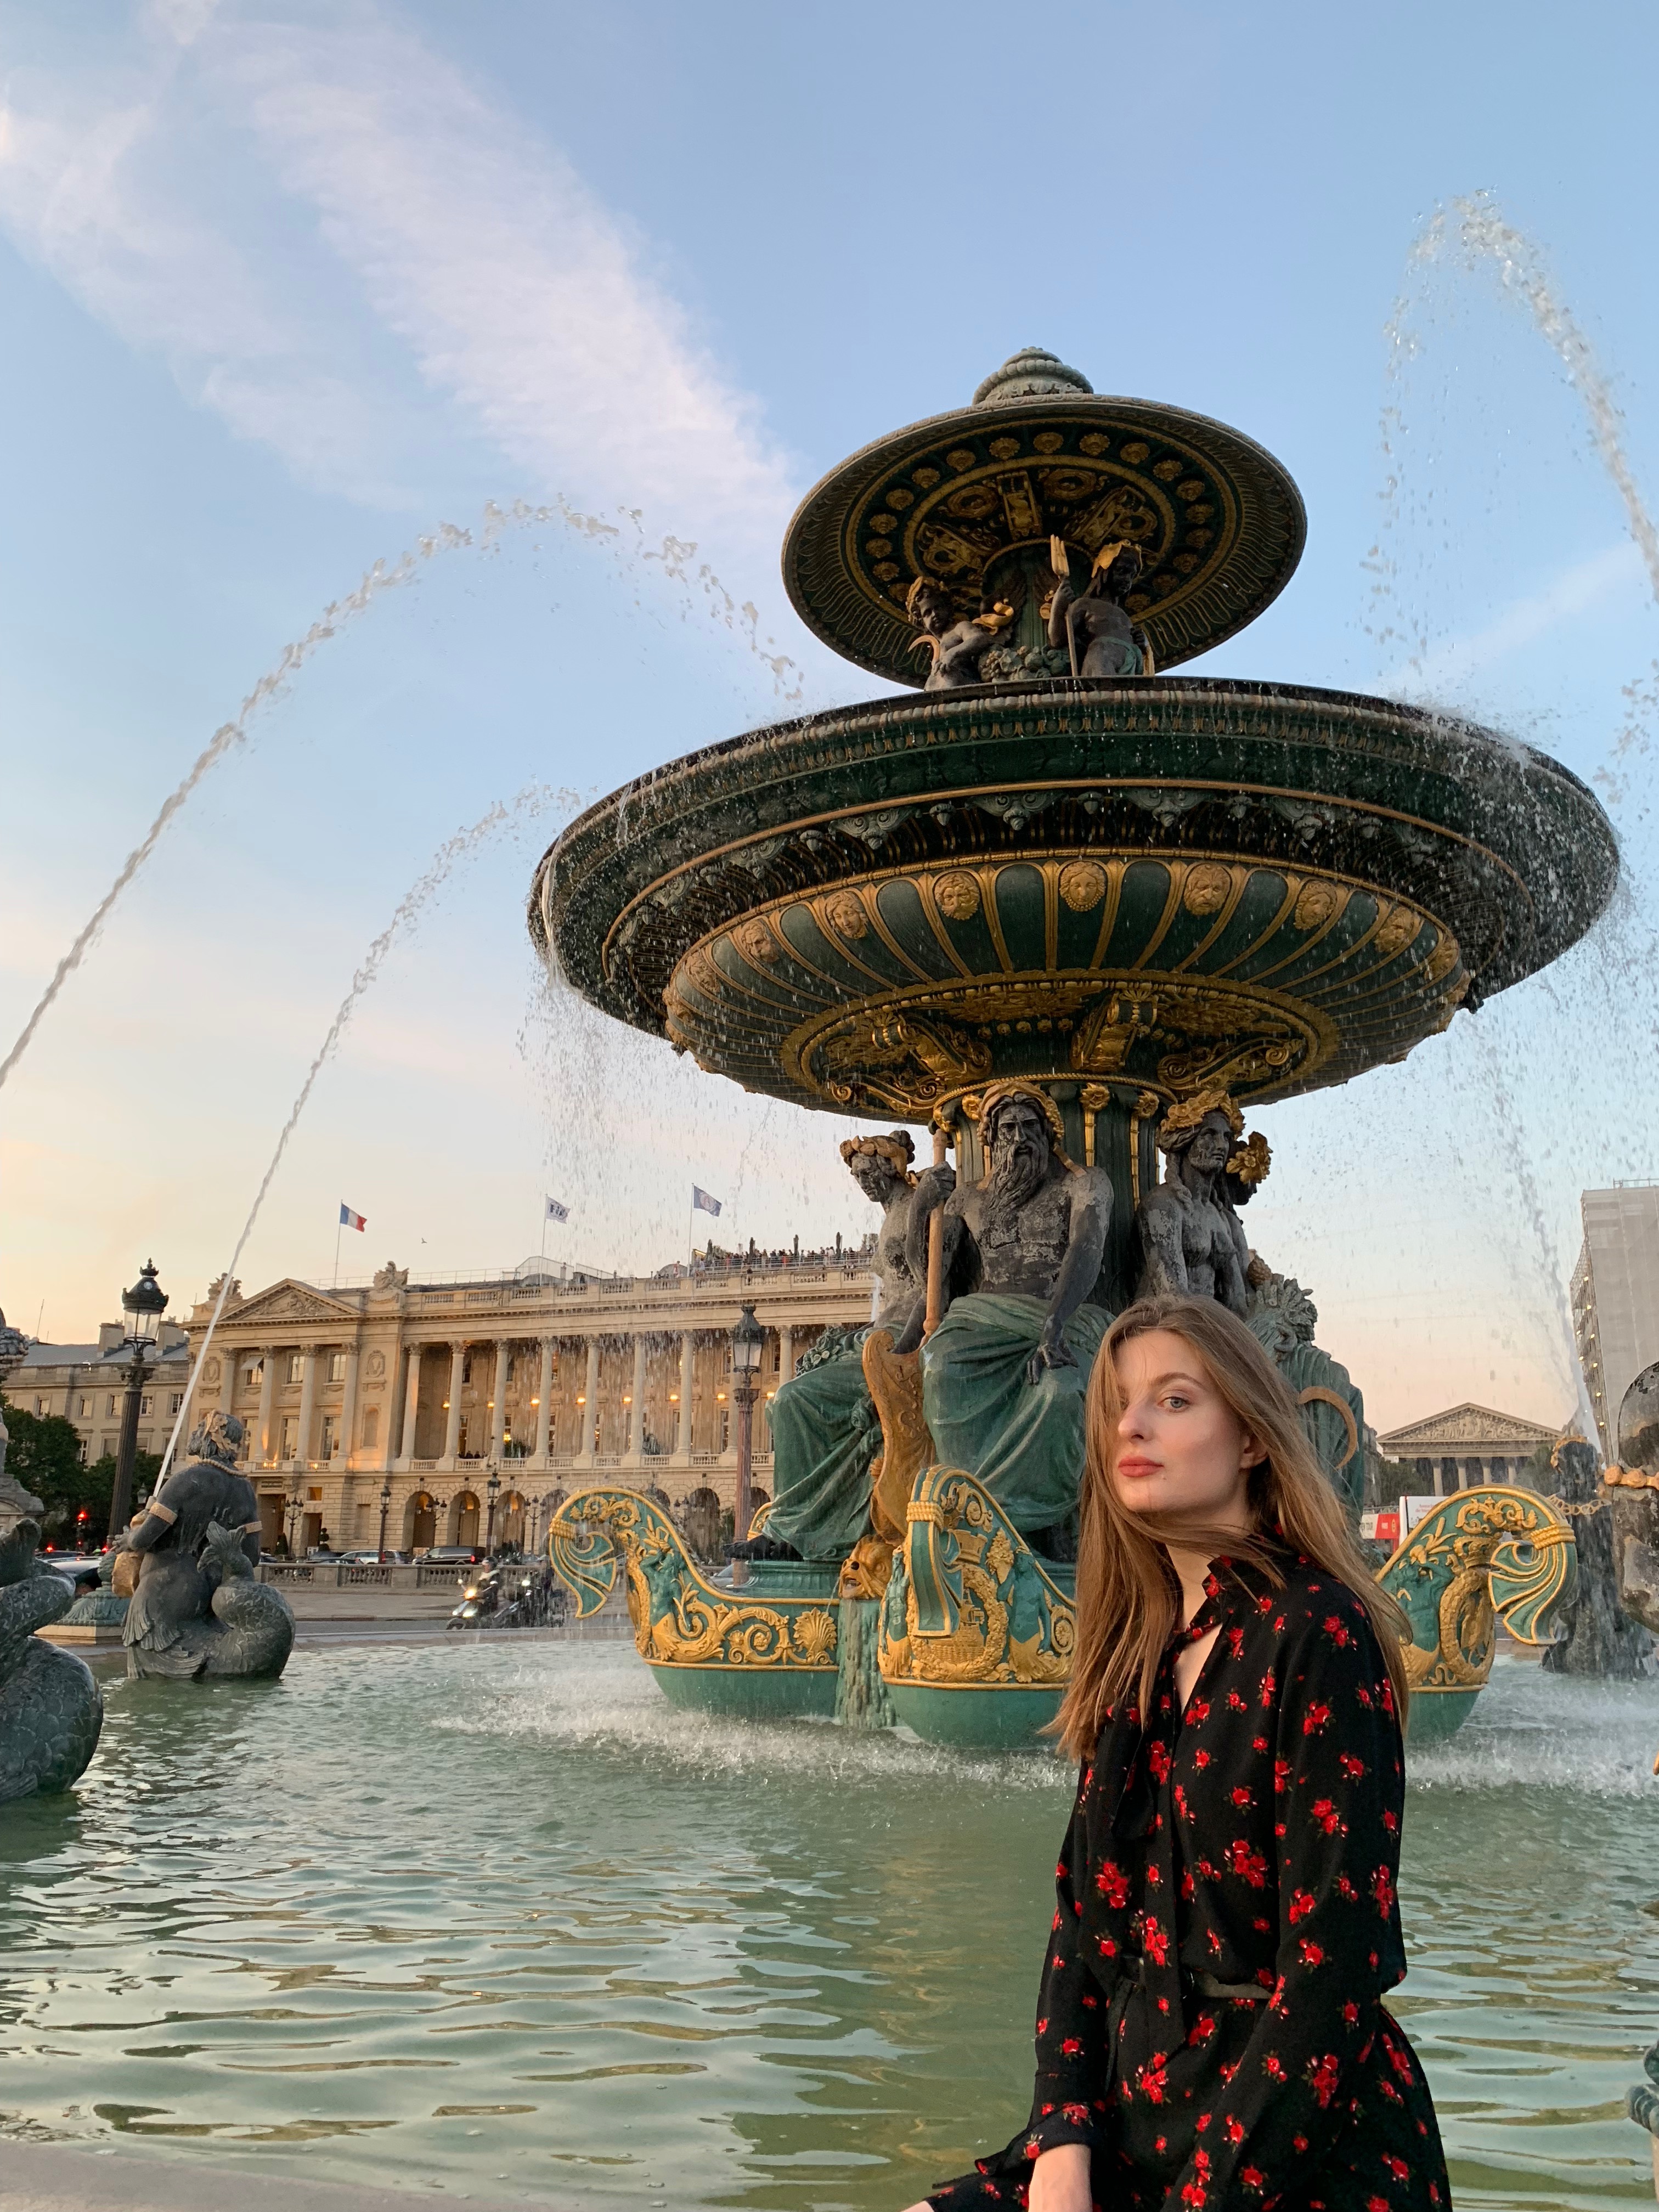 Updated: Apple iPhone XS Max camera review - DXOMARK